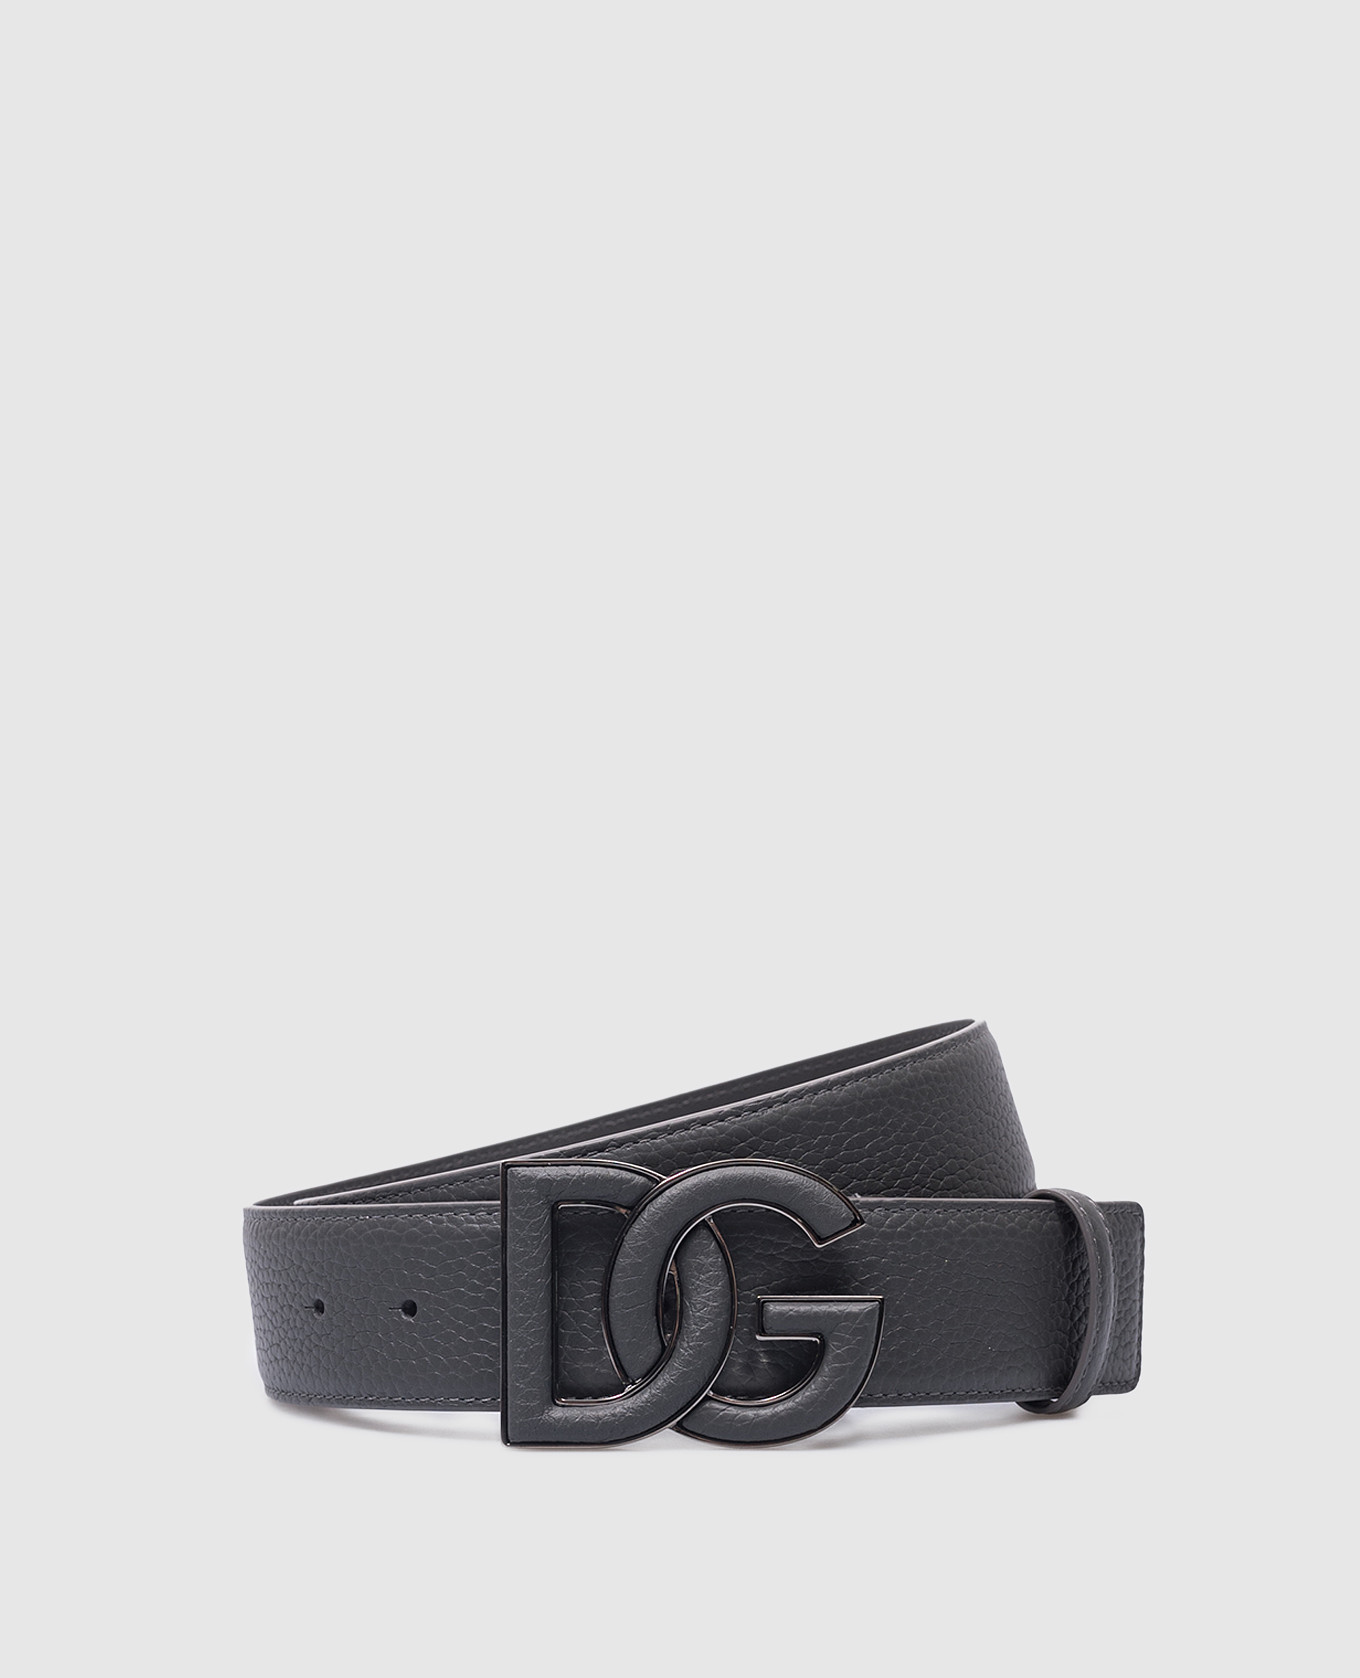 Gray leather belt with logo